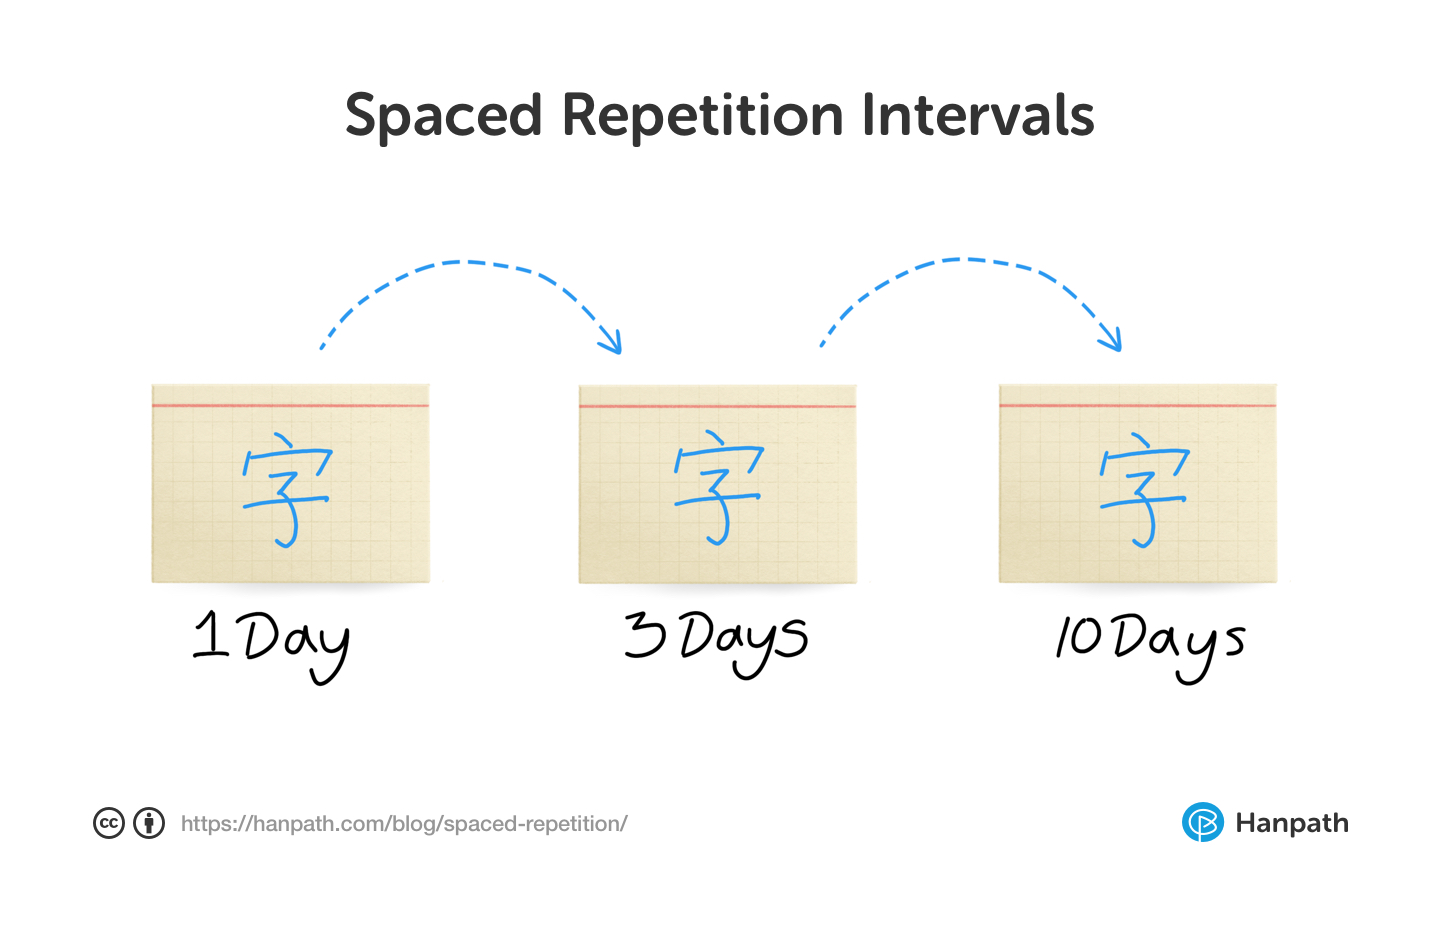 Spaced repetition intervals